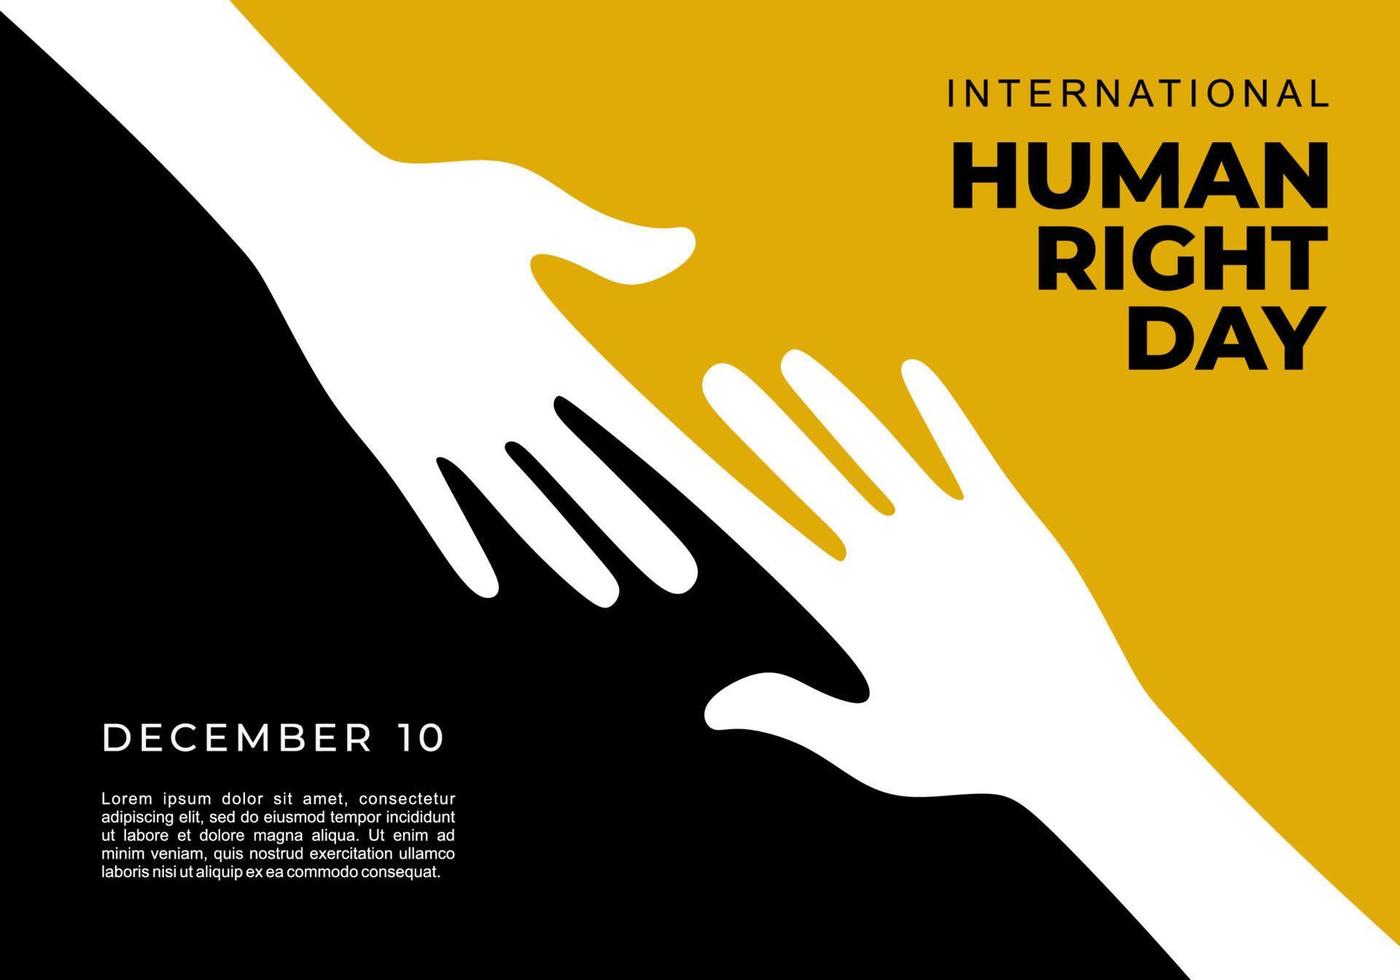 International human right day background celebrated on december 10. vector